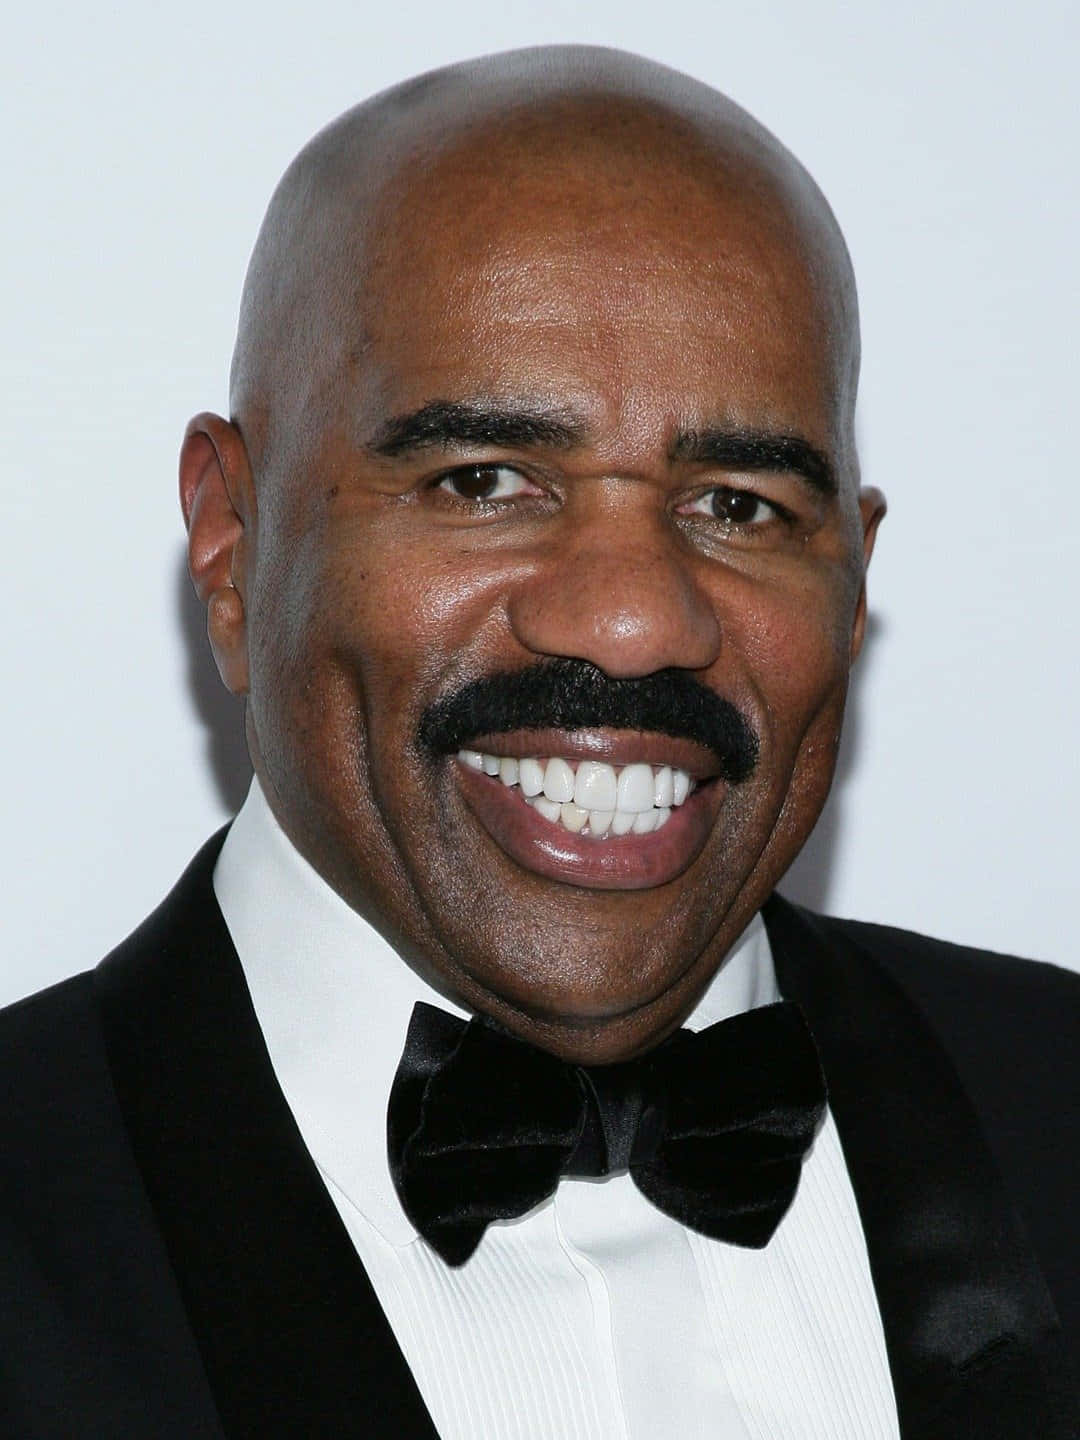 Renowned Television Personality, Steve Harvey, Captured In A Joyous Moment